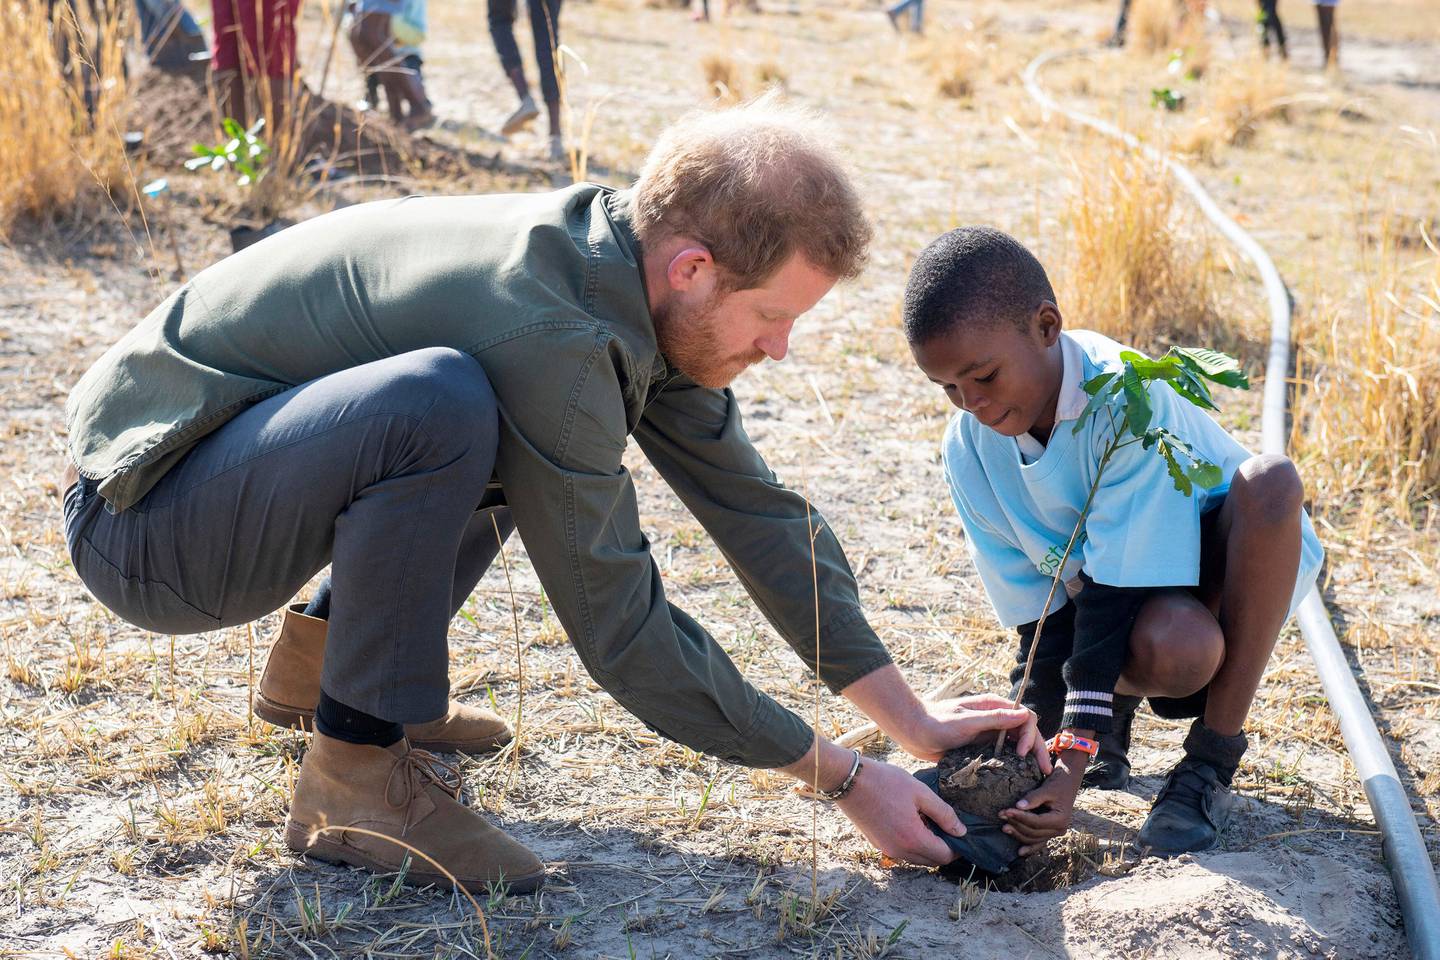 Britain's Prince Harry attends a tree planting event with local school children, at the Chobe Tree Reserve, in Botswana, Thursday Sept. 26, 2019, on day four of the royal tour of Africa. The 10-day, multi-country tour includes stops for Harry in Botswana, Angola and Malawi with a focus on wildlife protection, mental health and mine clearance — a topic given global attention by Harry's late mother, Princess Diana, when she walked through an active mine field during an Africa visit years ago. (Dominic Lipinski/Pool via AP)